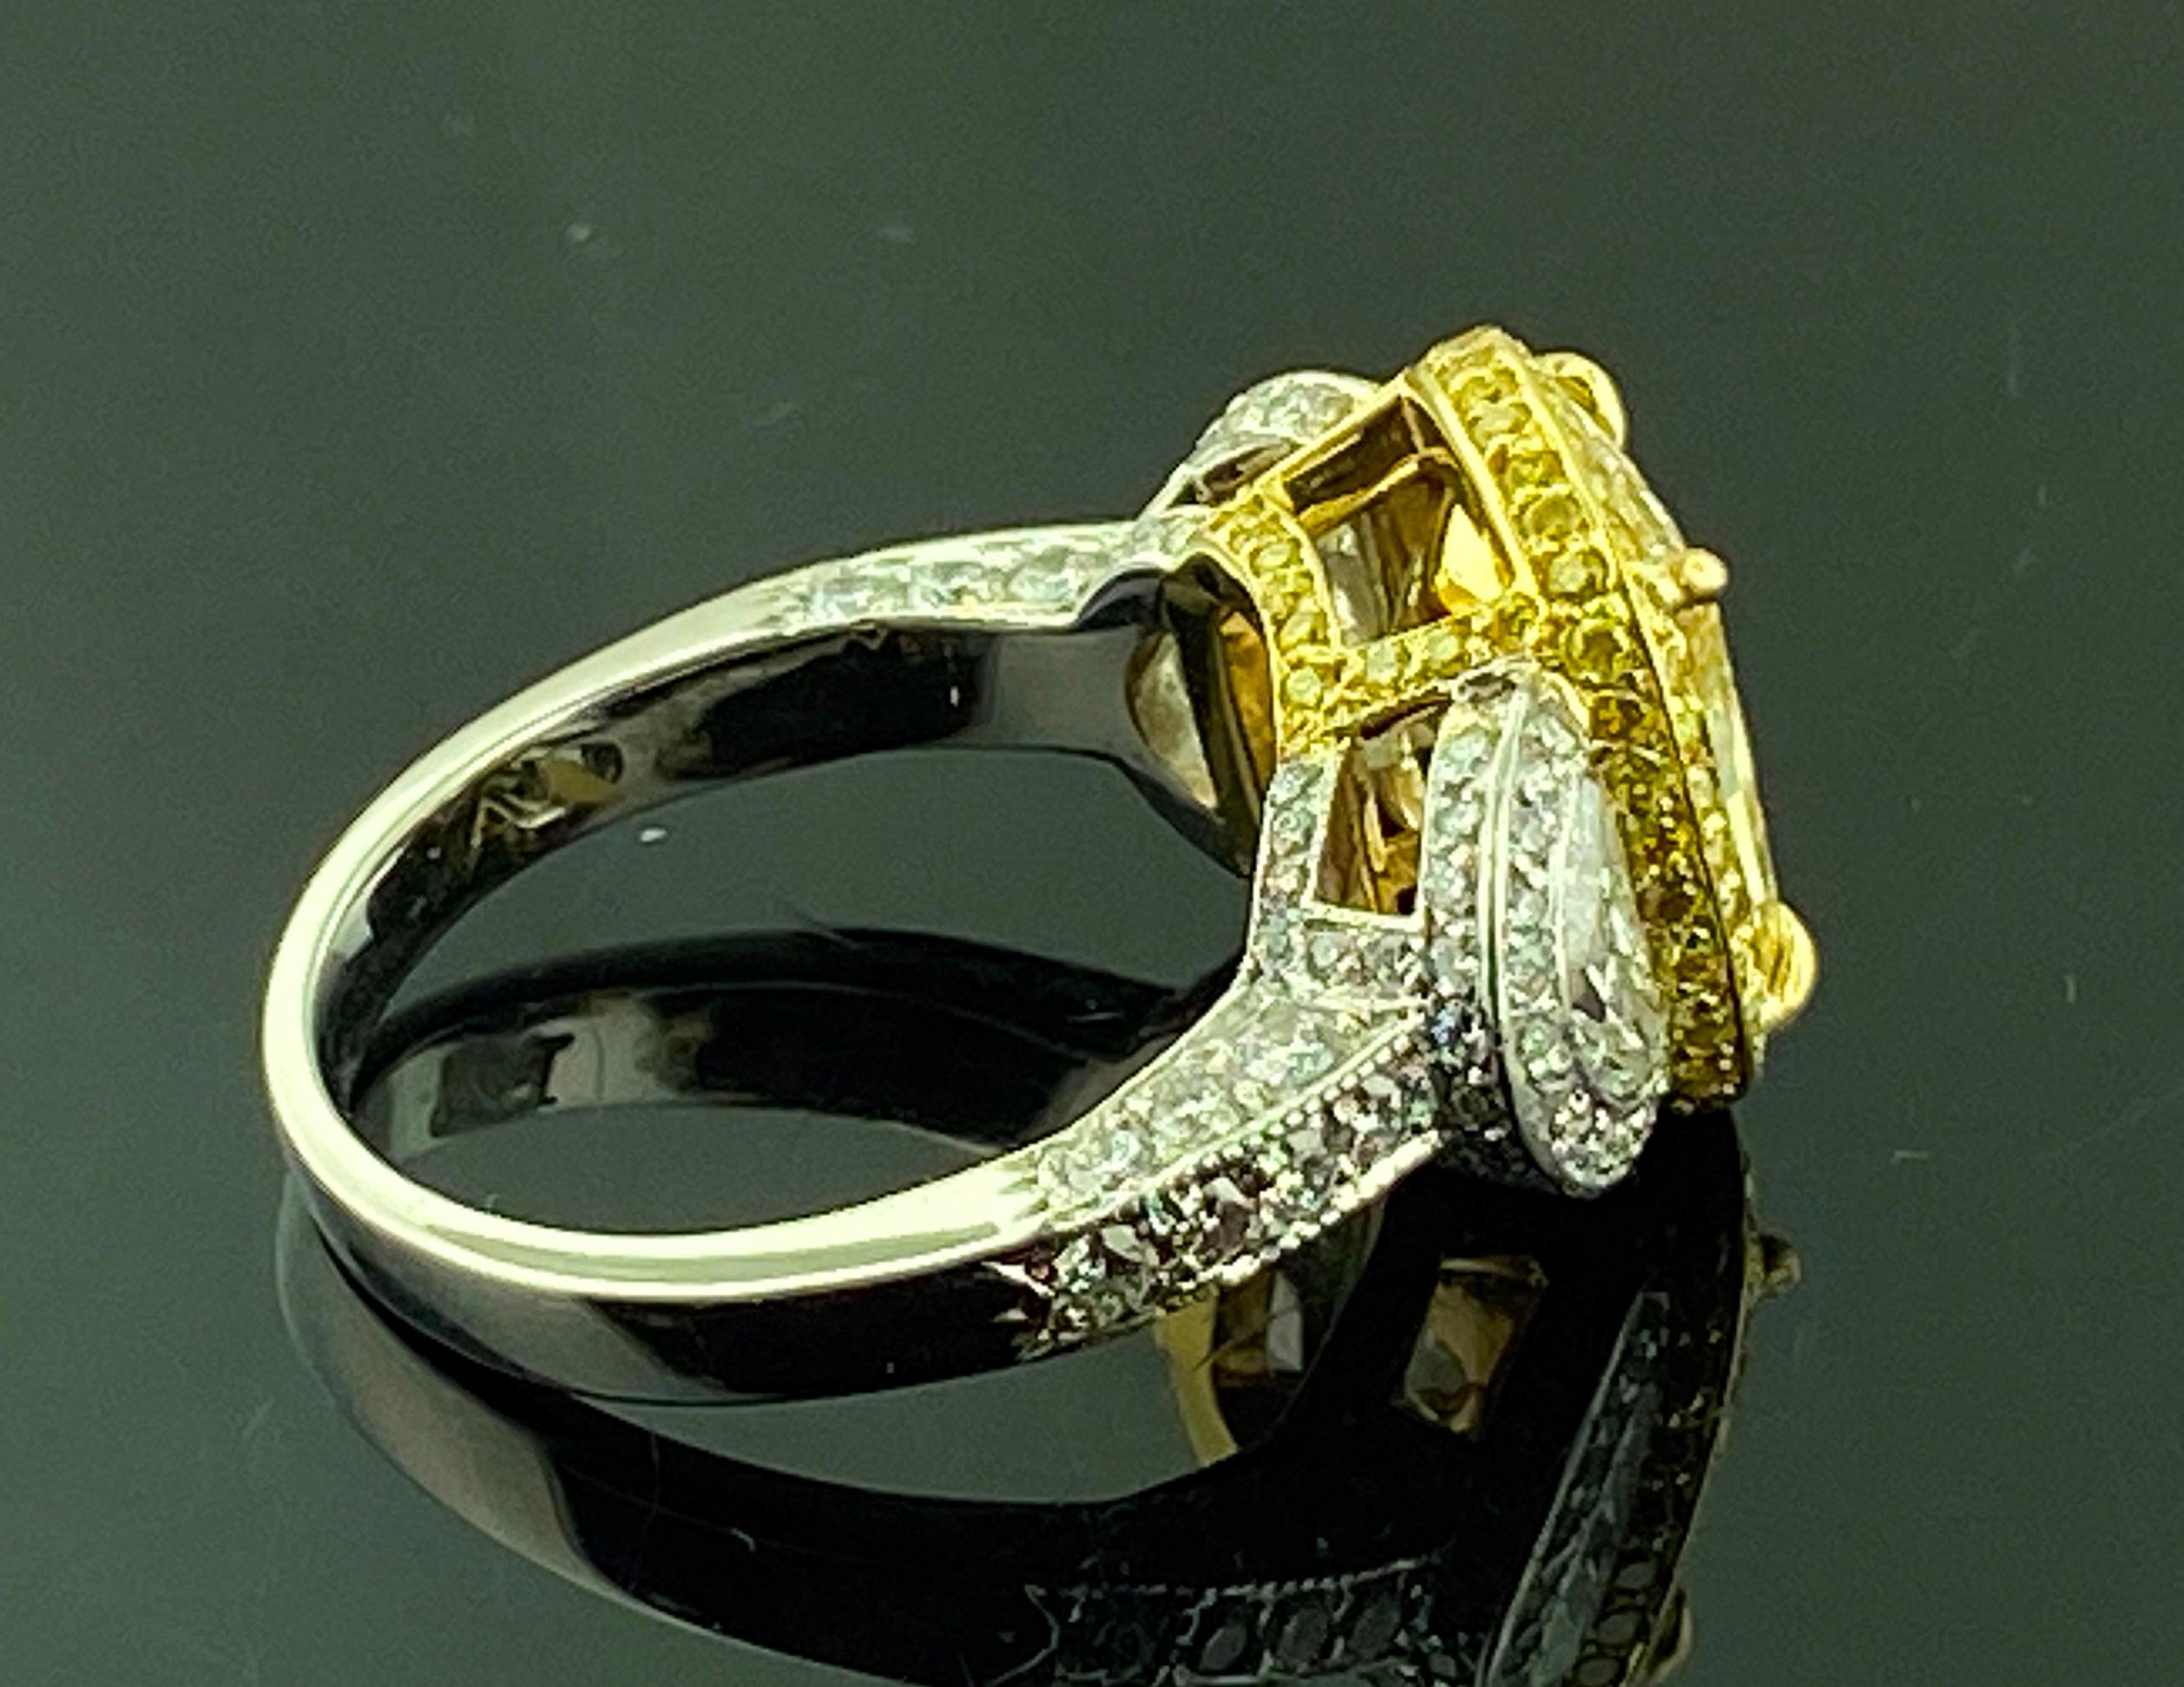 Platinum and 18 KT Yellow Gold 3.74 Ct Radiant Cut Fancy Yellow Diamond Ring For Sale 1